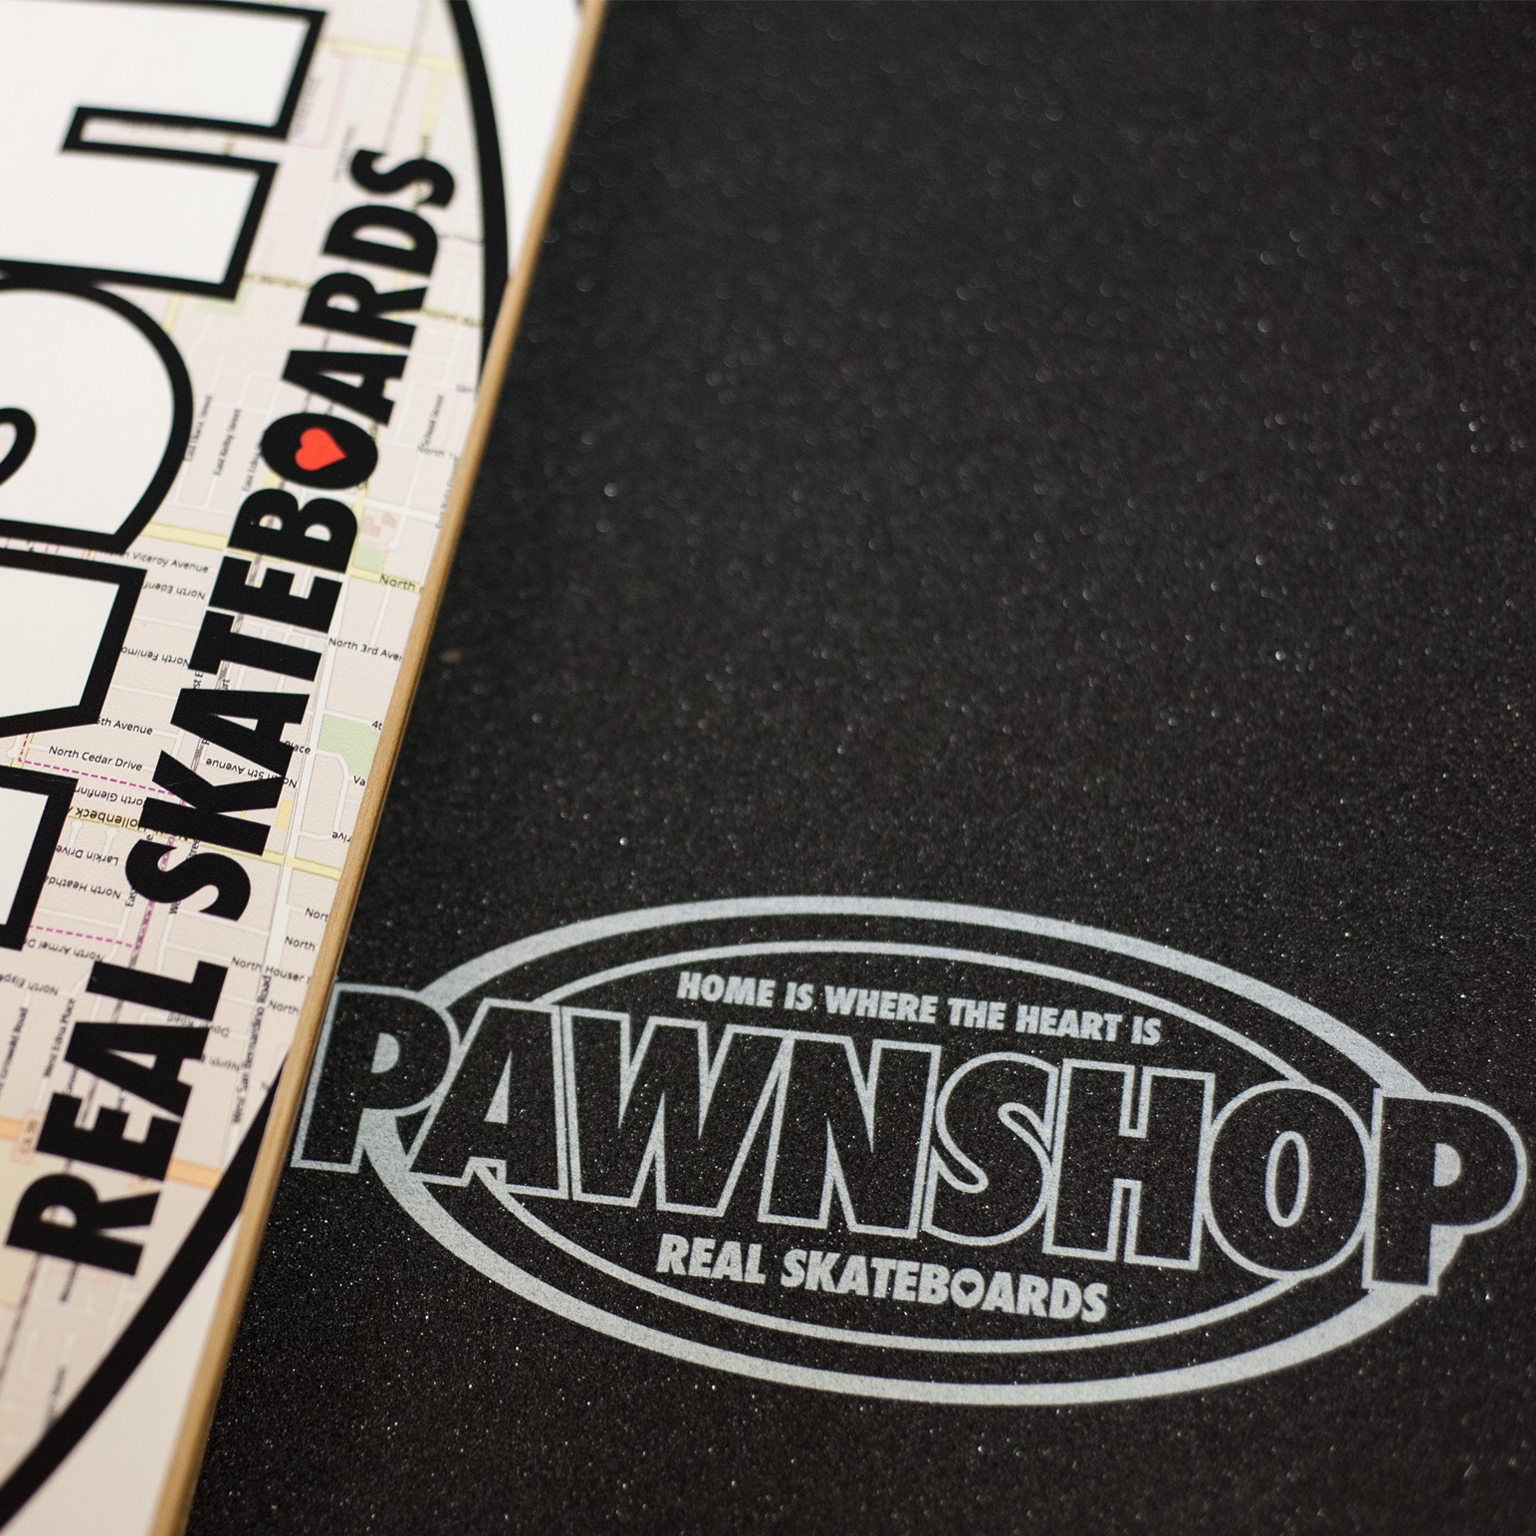 Fundraiser for Anthony Piscopo by Covina Life : Pawnshop Skate Co. Shop Fire